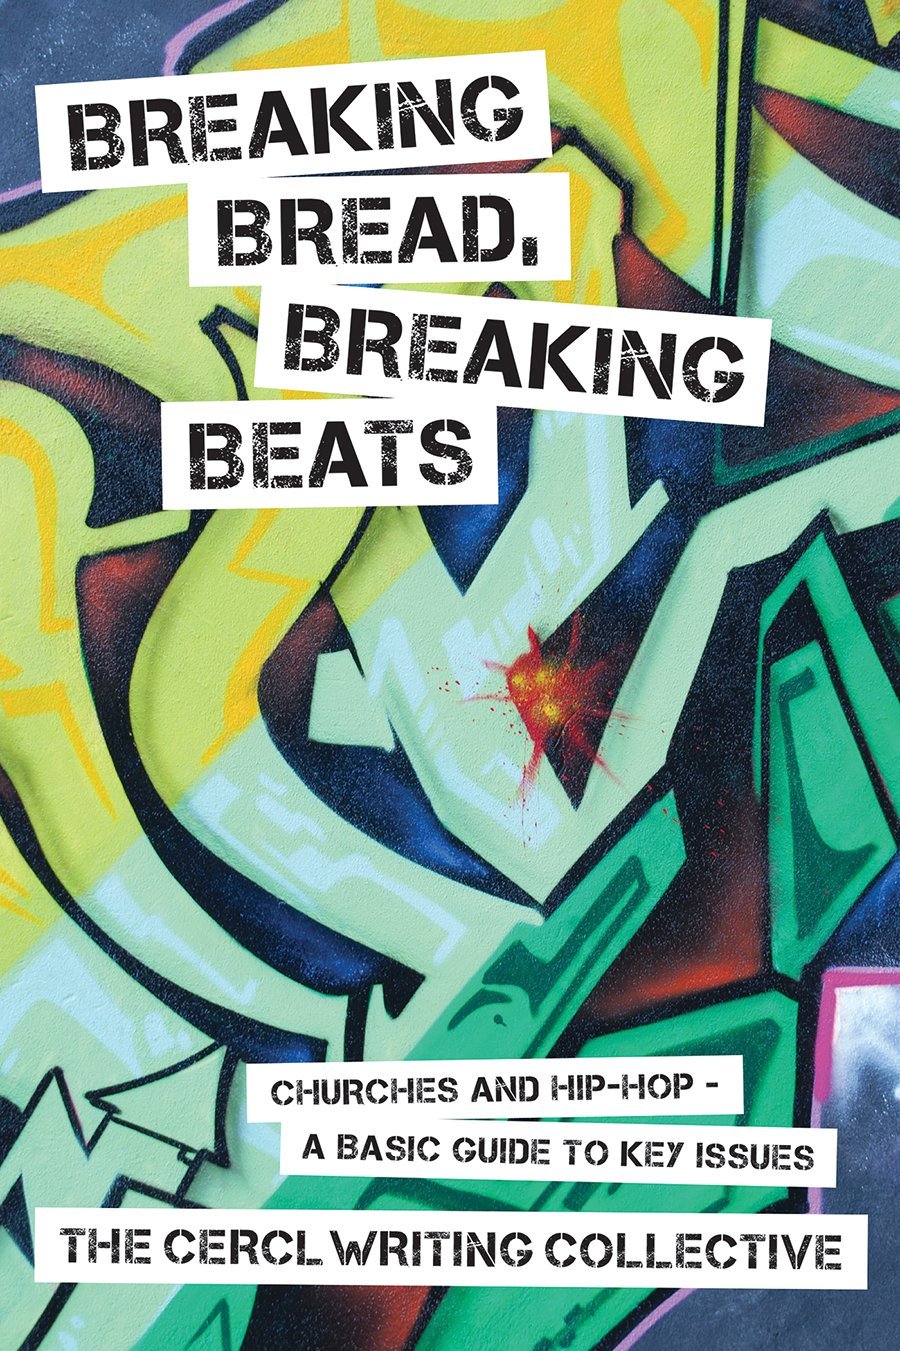 Breaking Bread, Breaking Beats: Churches and Hip-Hop A Basic Guide to Key Issues